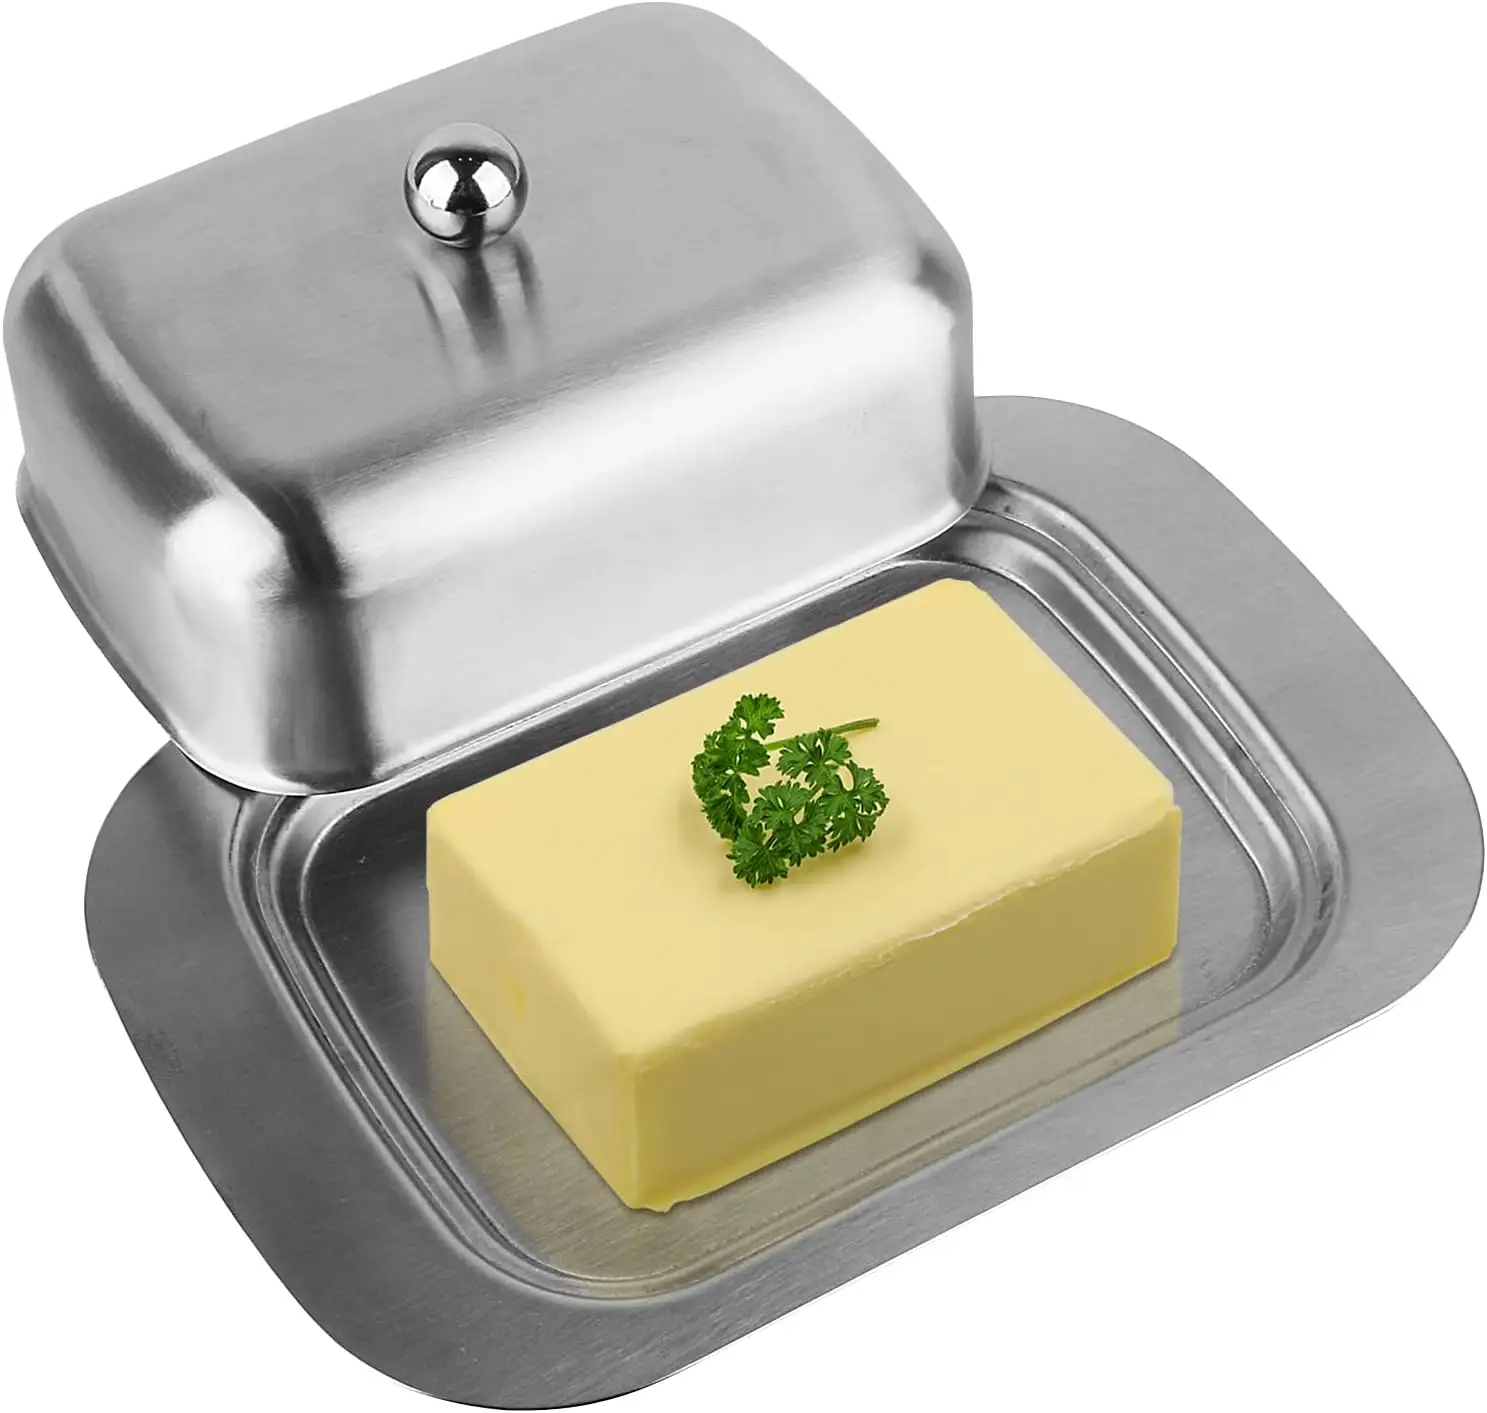 Kitchen Home Cooking Stainless Steel Butter Dish with Lid 430 stainless steel butter plate keep butter fresh